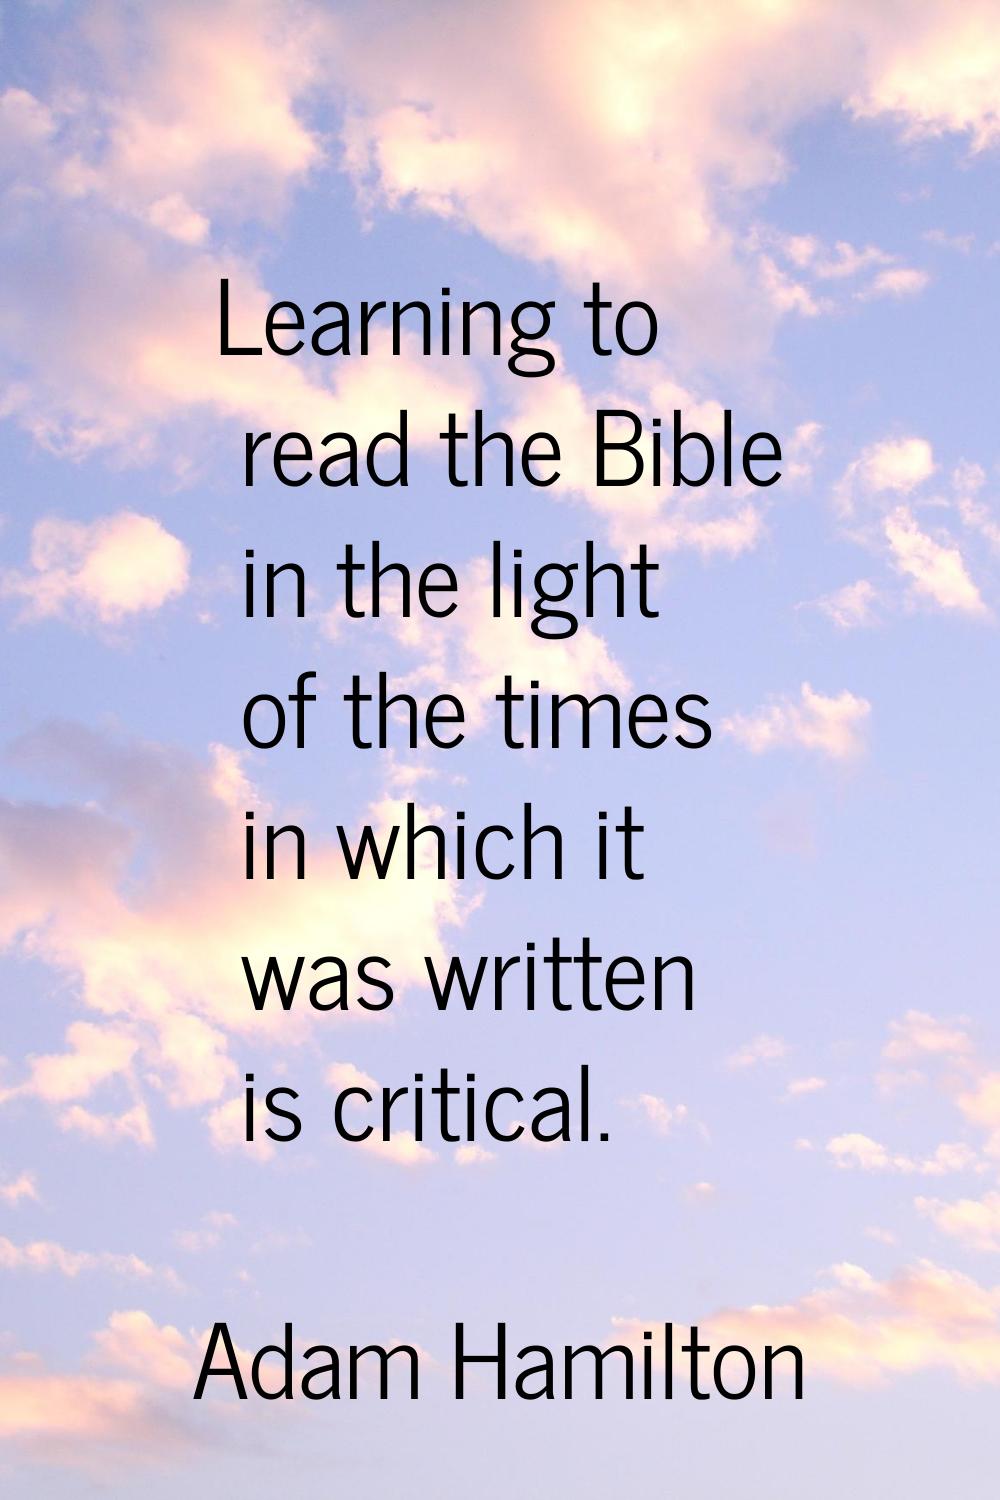 Learning to read the Bible in the light of the times in which it was written is critical.